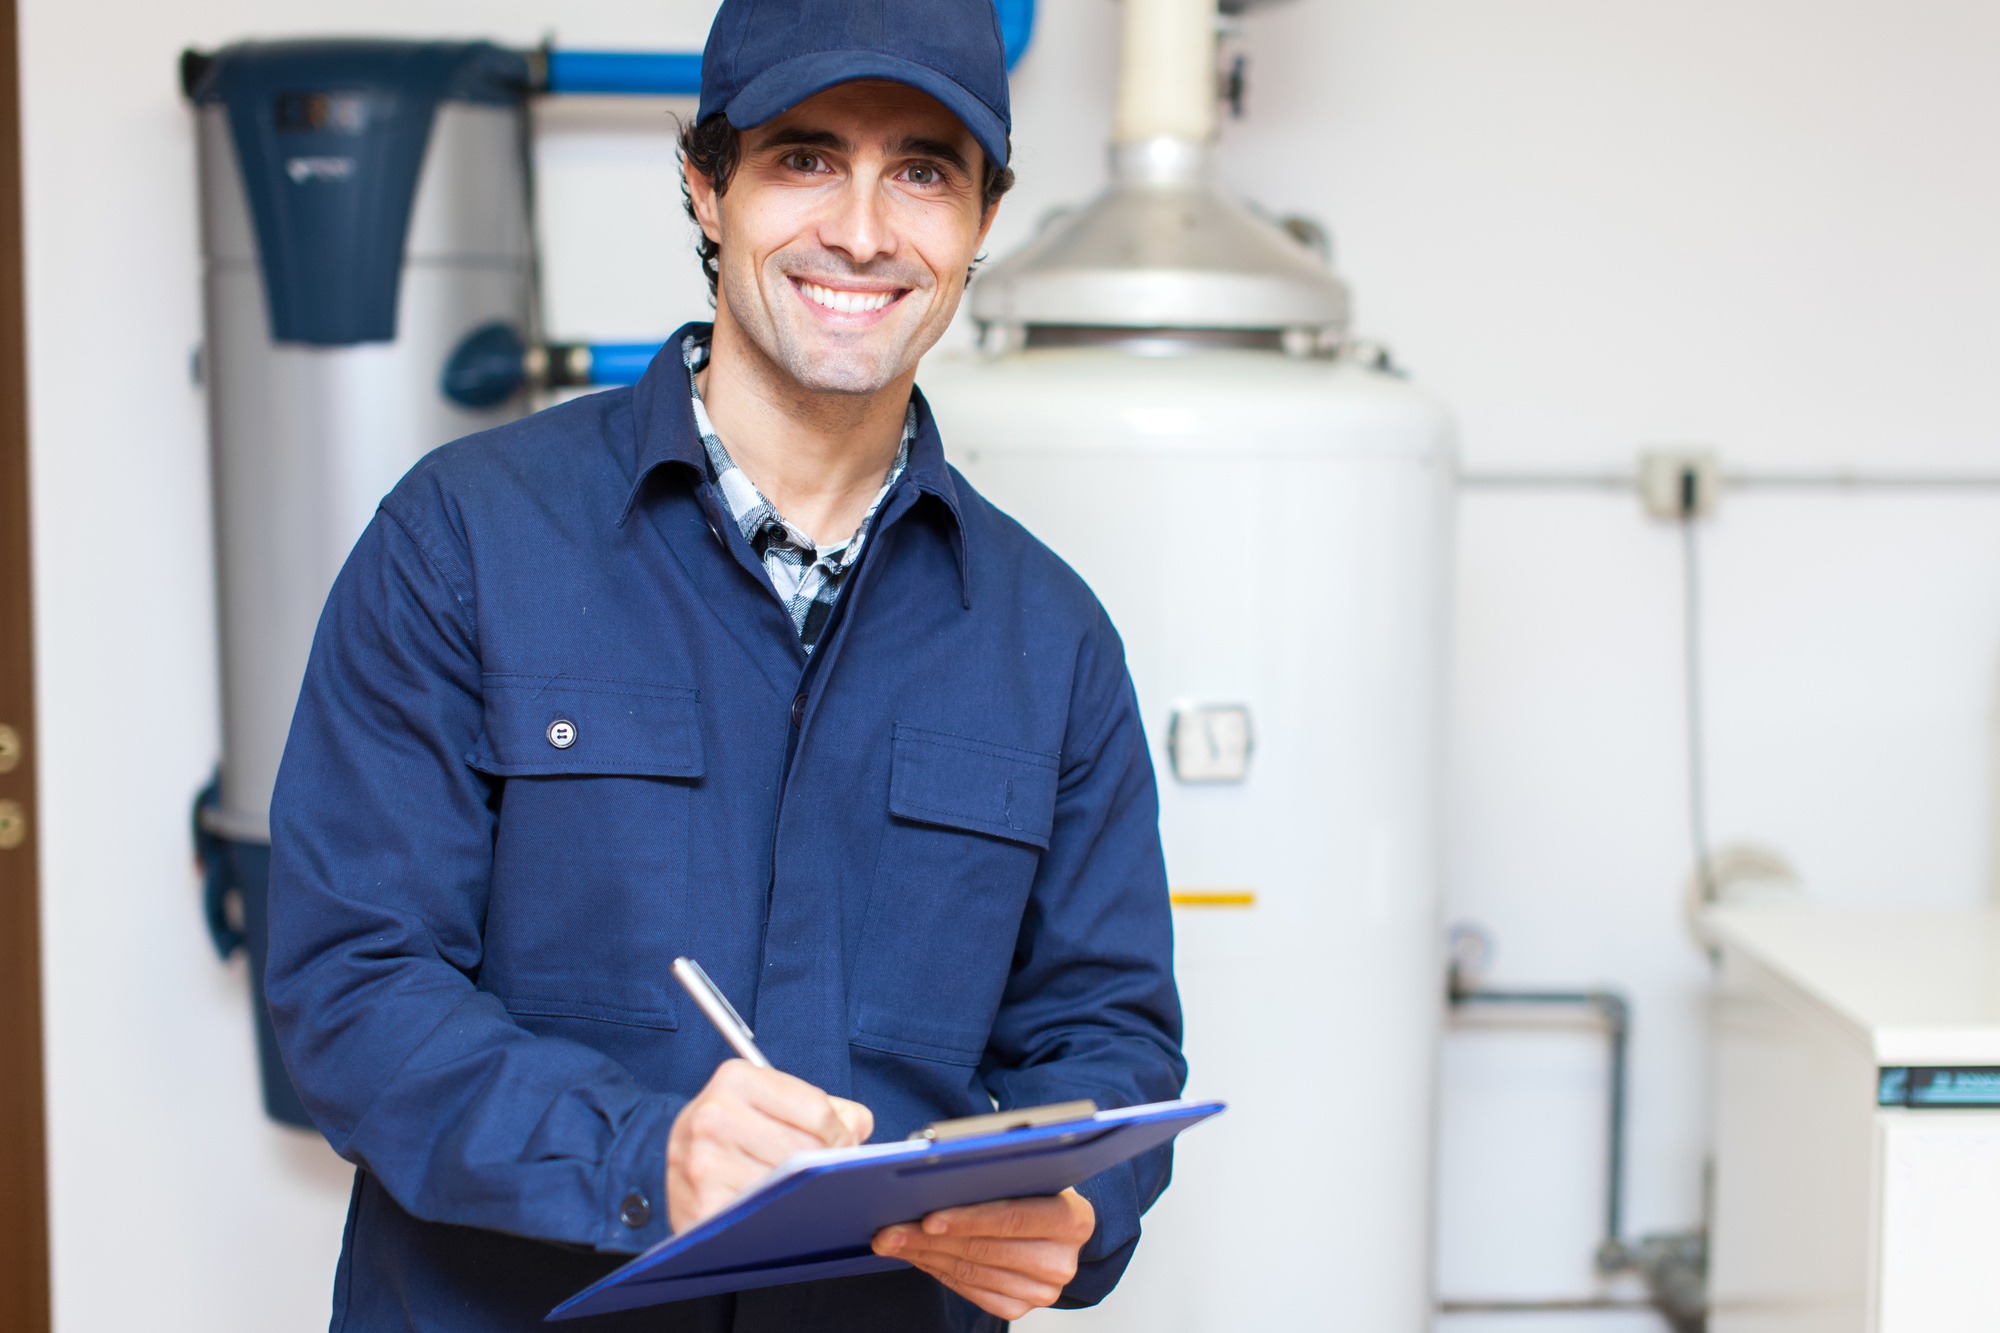 7 Plumbing Marketing Ideas to Grow Your Business